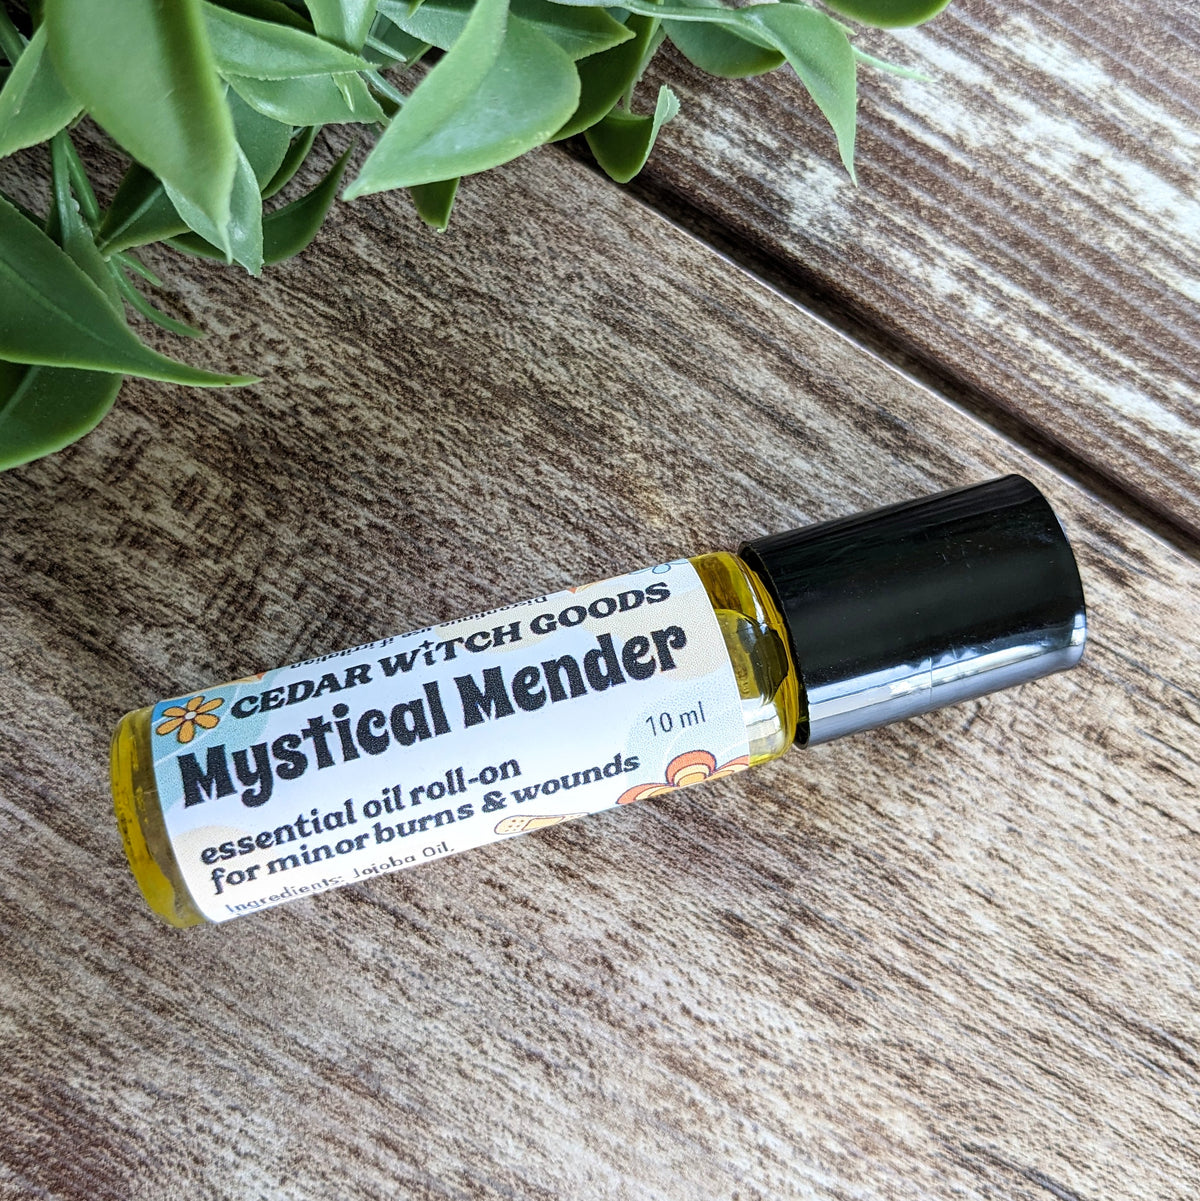 Mystical Mender Essential Oil Roll On for Minor Cuts &amp; Burns